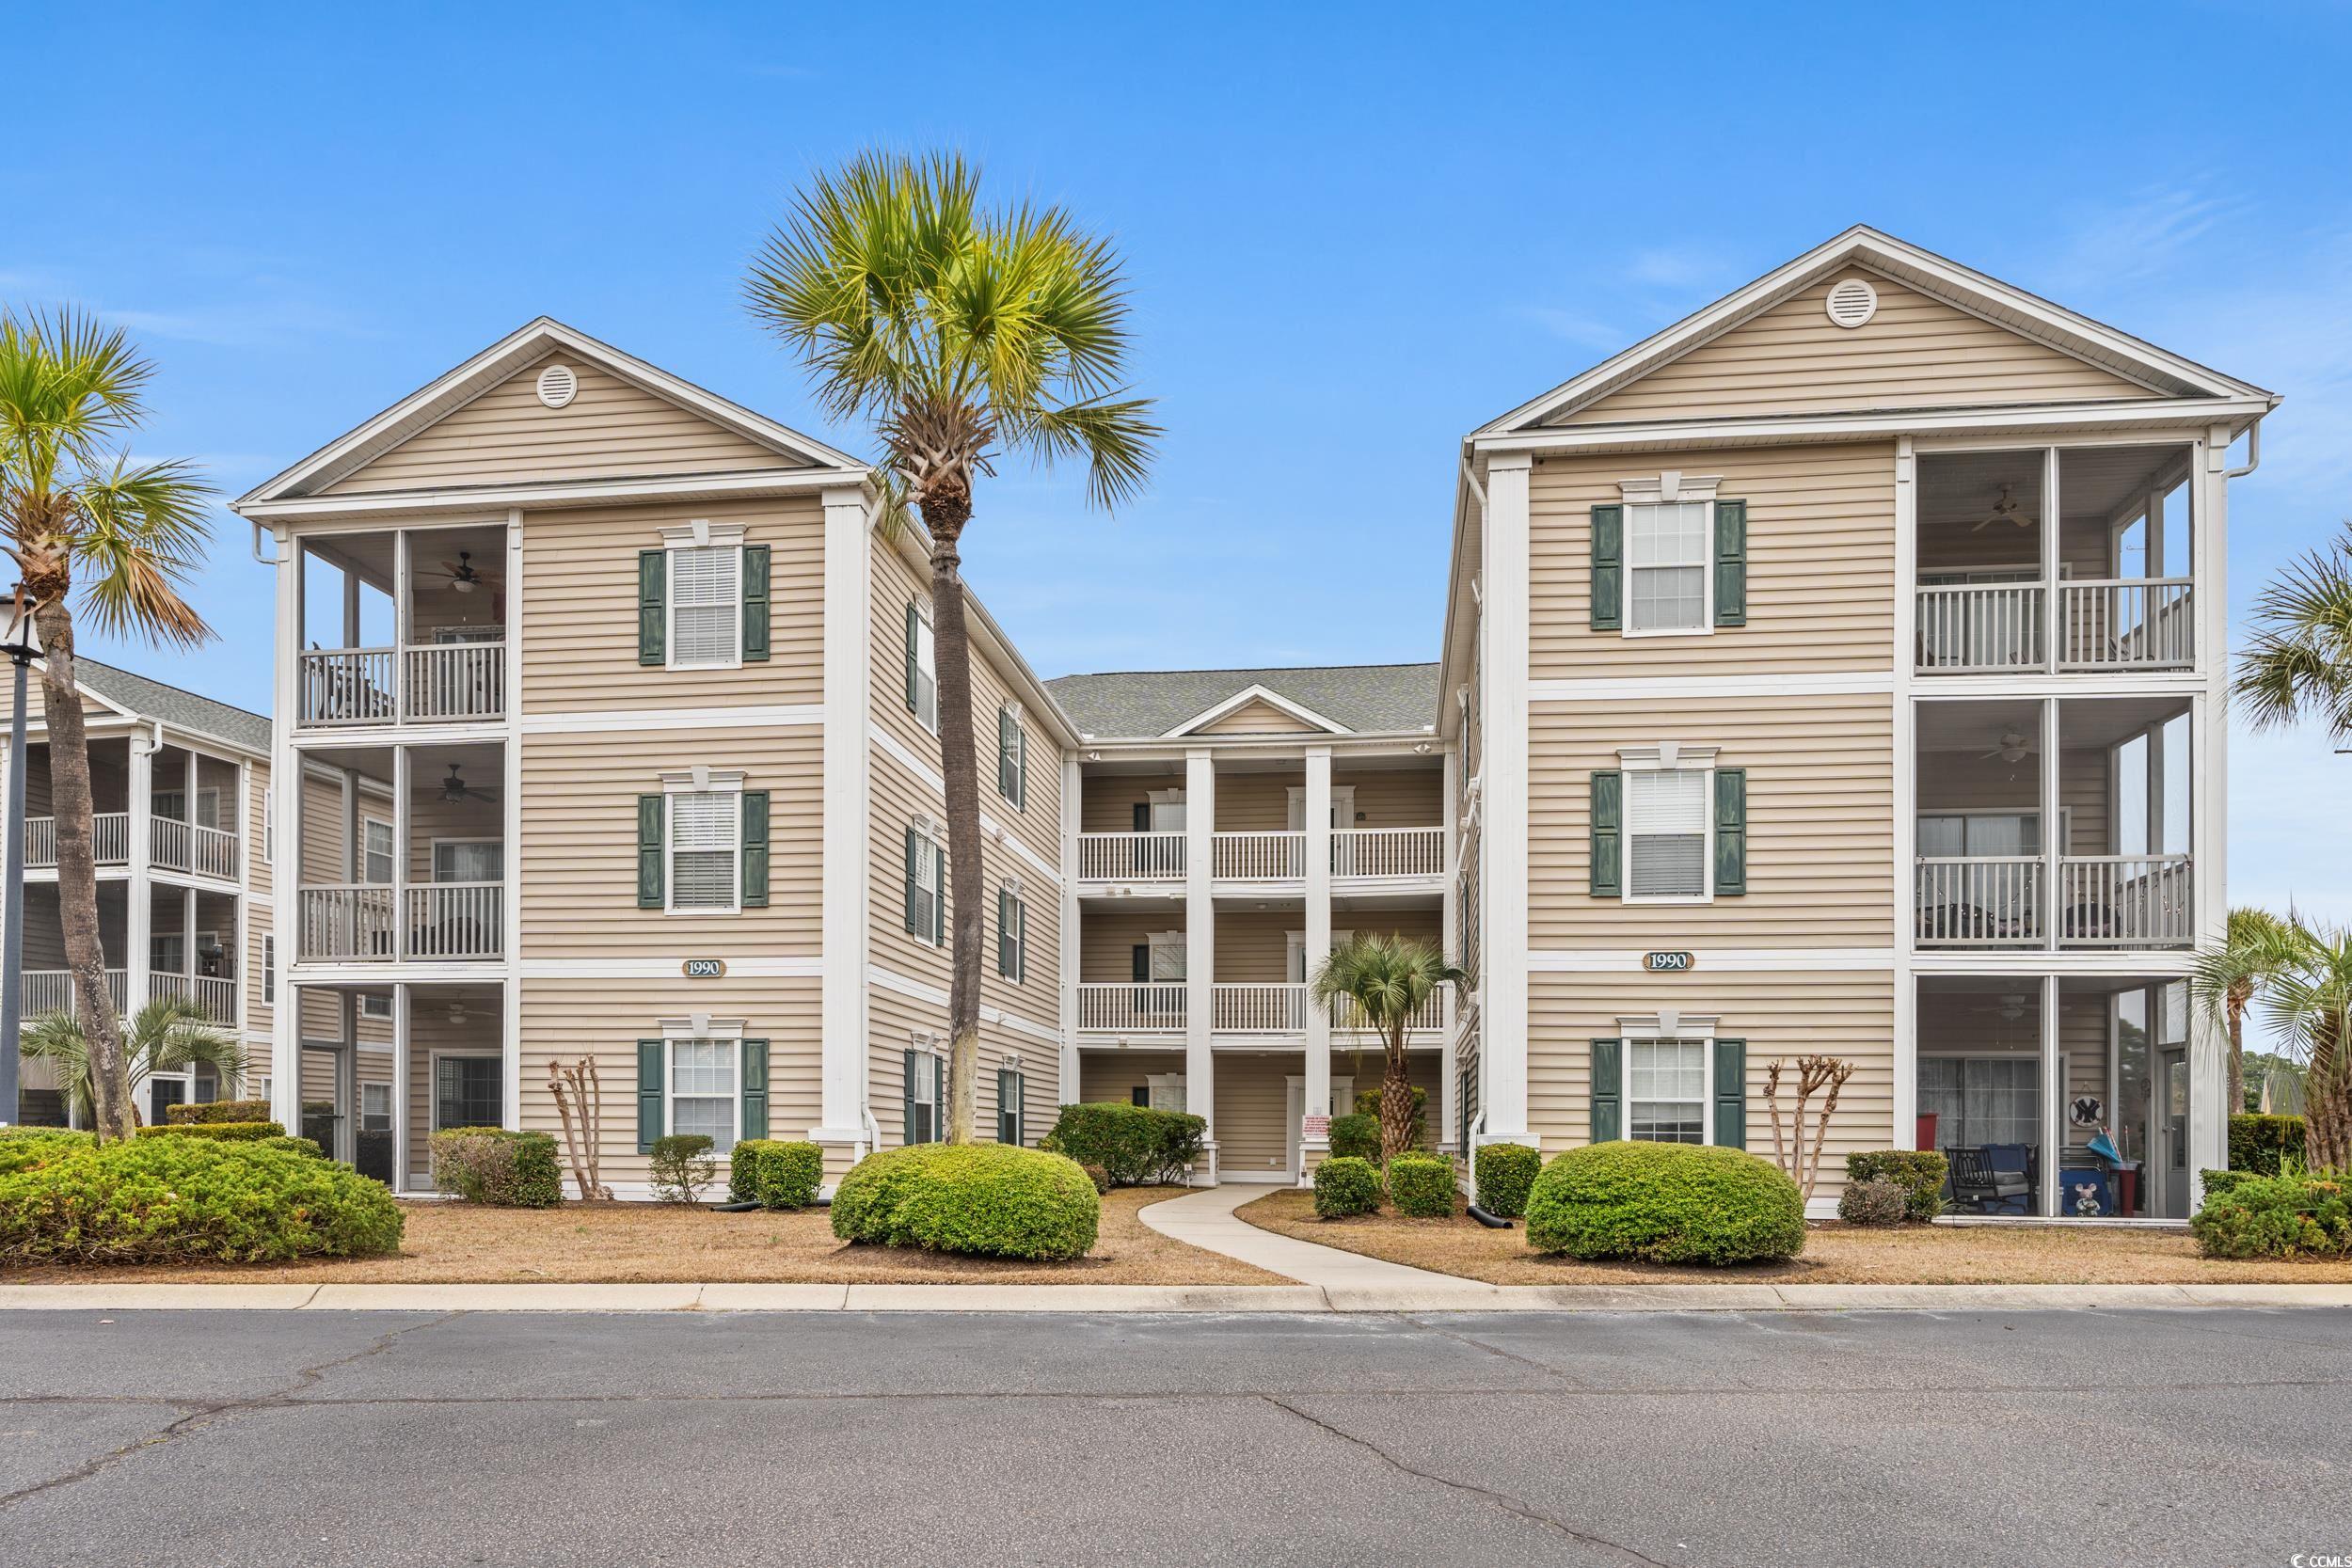 don't miss out on this chance to own a stunning 2 bedroom, 2 bathroom first-floor end unit in the sought-after location of surfside beach! whether you're looking for a short or long term rental investment opportunity, a vacation getaway, or a permanent residence by the beach, this unit has it all! unit 102 has been beautifully renovated with waterproof laminate flooring, high end carpet and padding in the bedrooms, new granite countertops with a stylish tile backsplash, new appliances including a dishwasher and microwave, and fresh paint throughout (excluding bathrooms). the hvac system was also recently replaced just 6 months ago! step outside onto the spacious screened porch, perfect for relaxing with a cup of coffee or enjoying meals with your family. reach out to the listing agent today to schedule a viewing before it's gone! measurements are not guaranteed and are the buyers responsibility to verify.